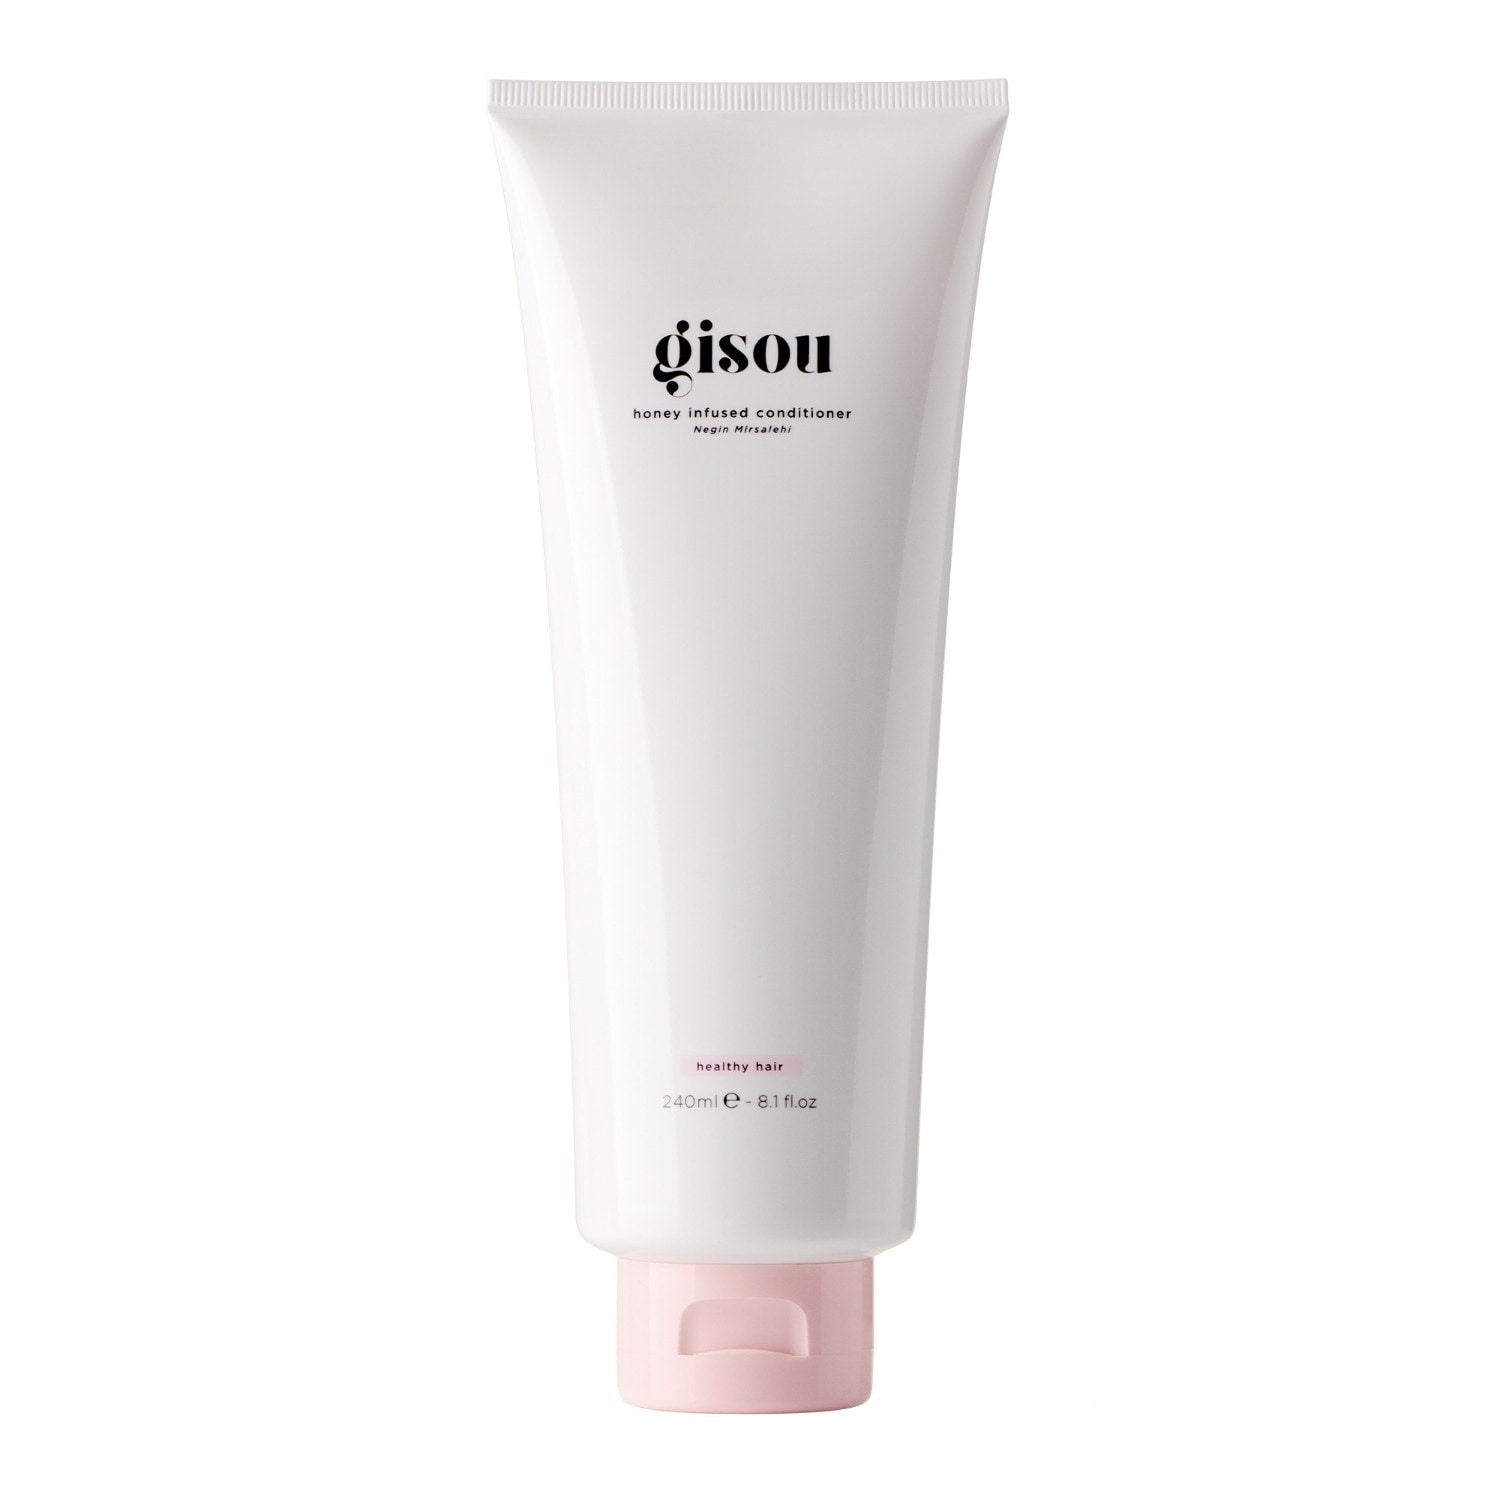 gisou Honey Infused Conditioner